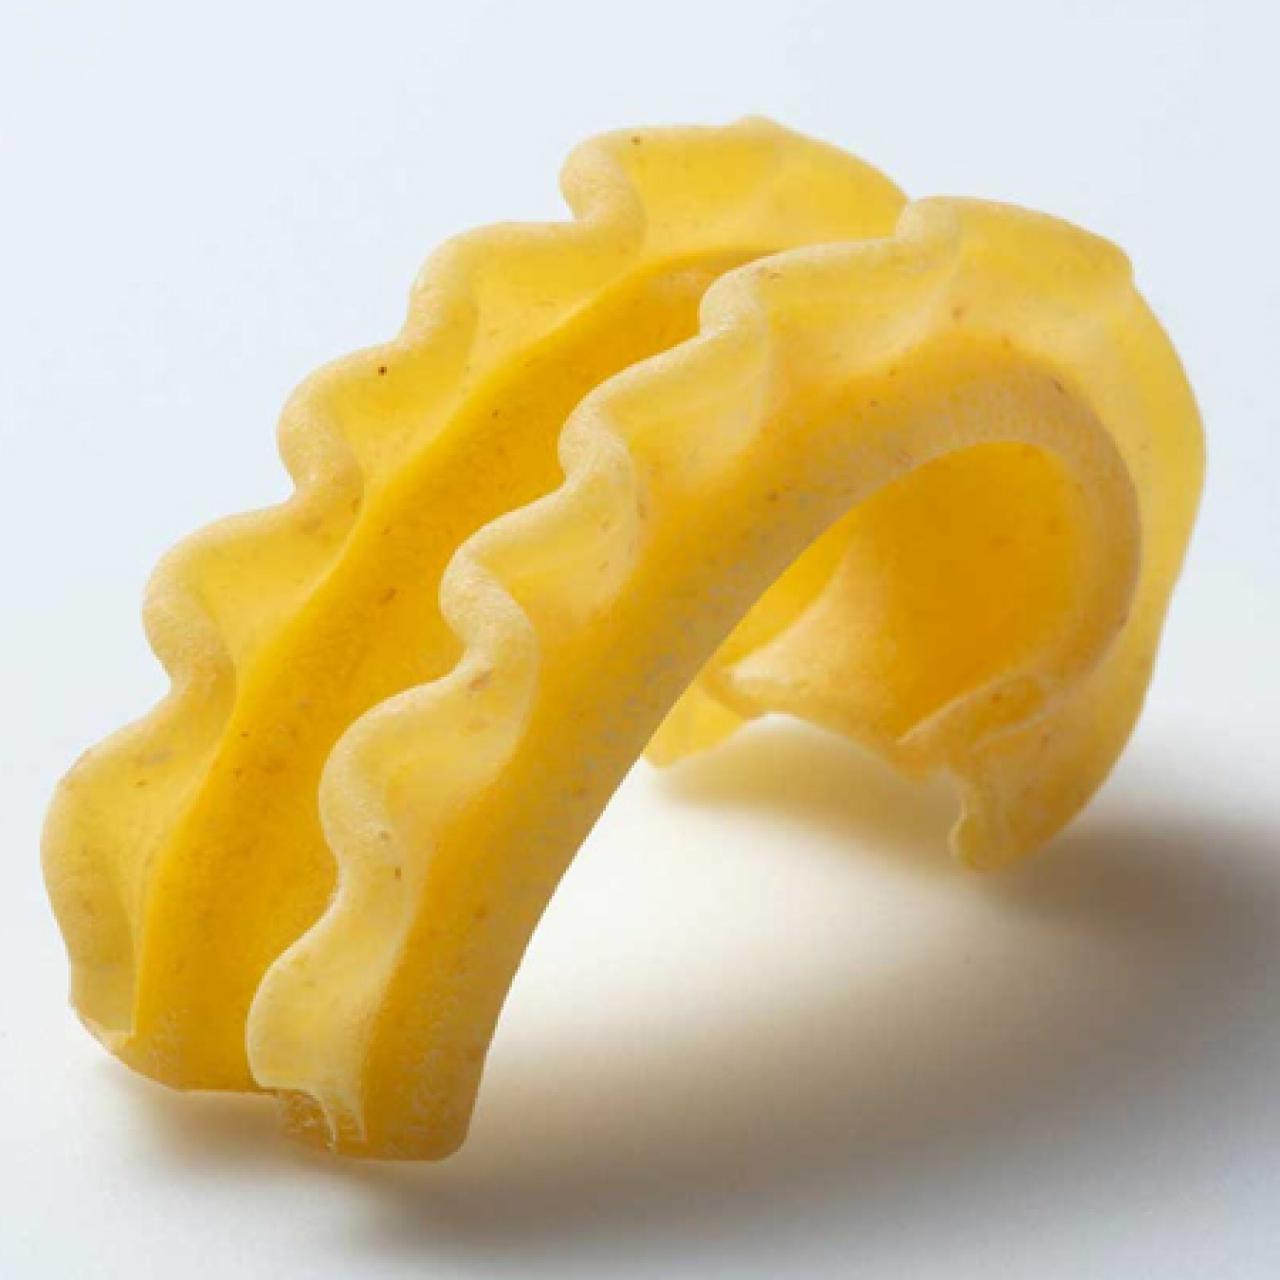 Dan Pashman Invents New Pasta Shape with Perfect “Saucability